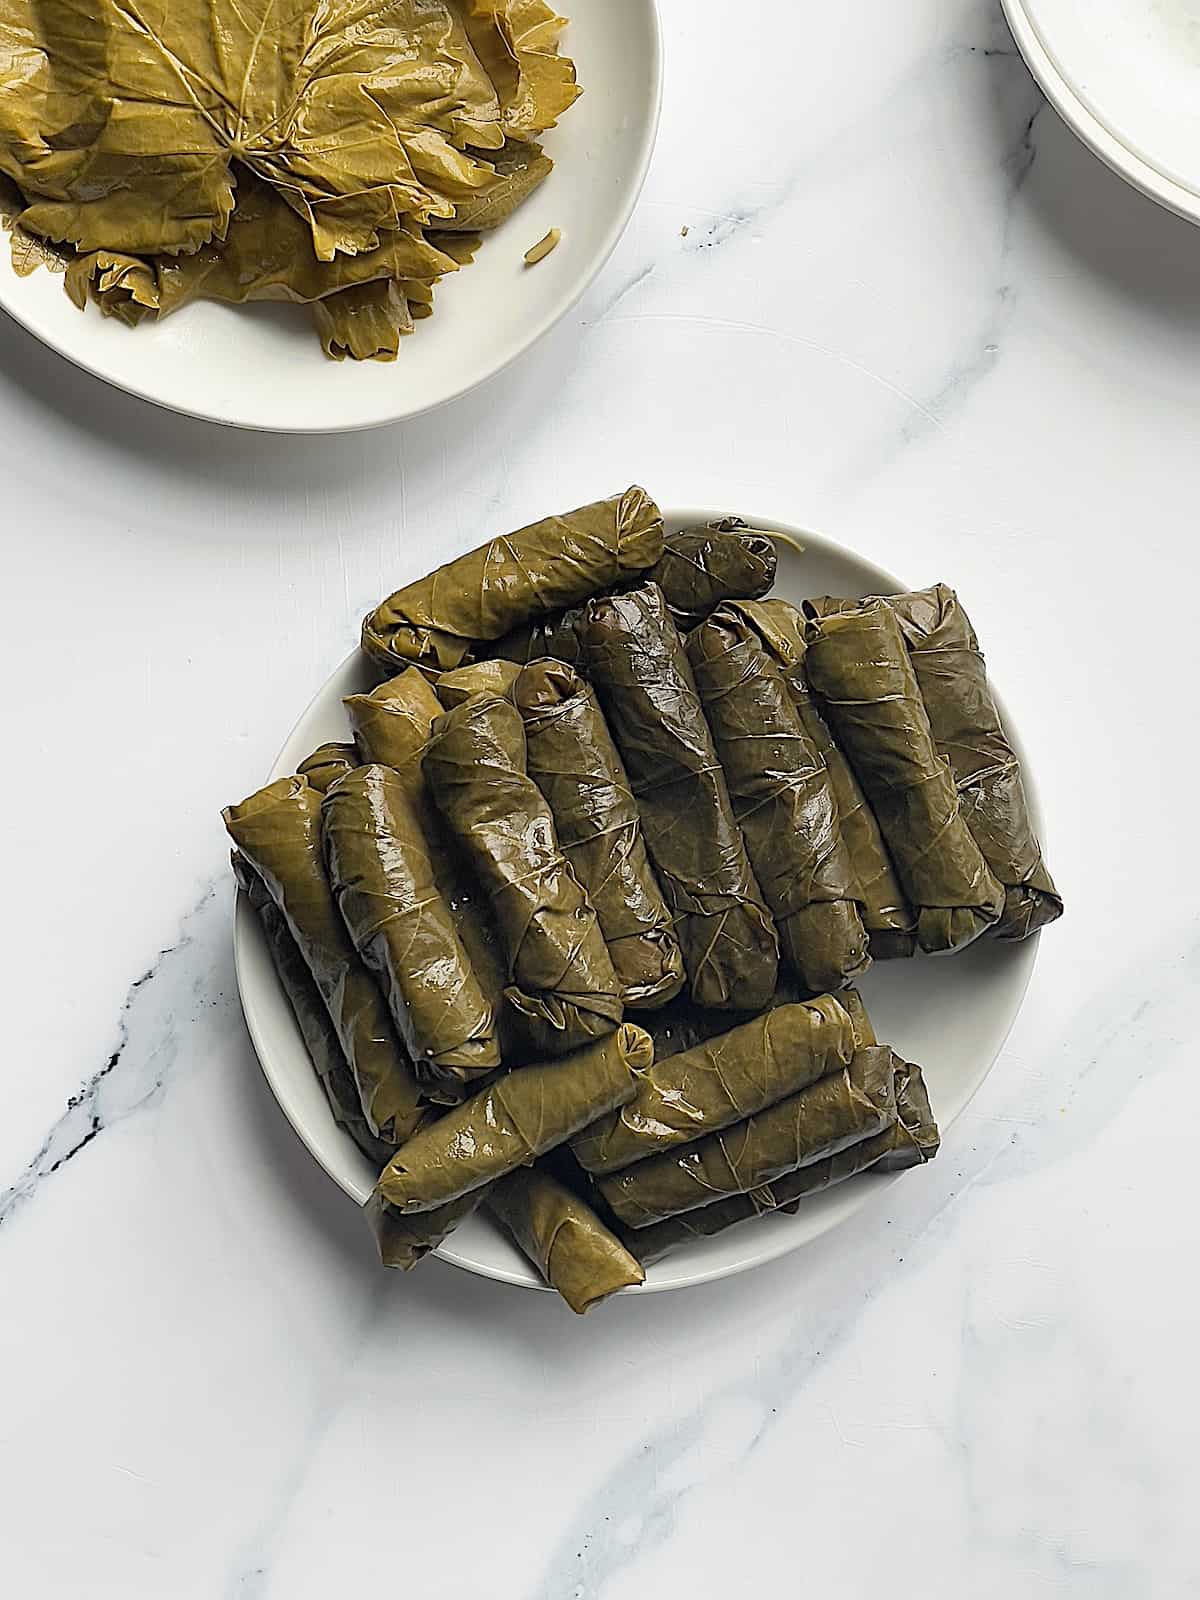 rolled grape leaves on a plate